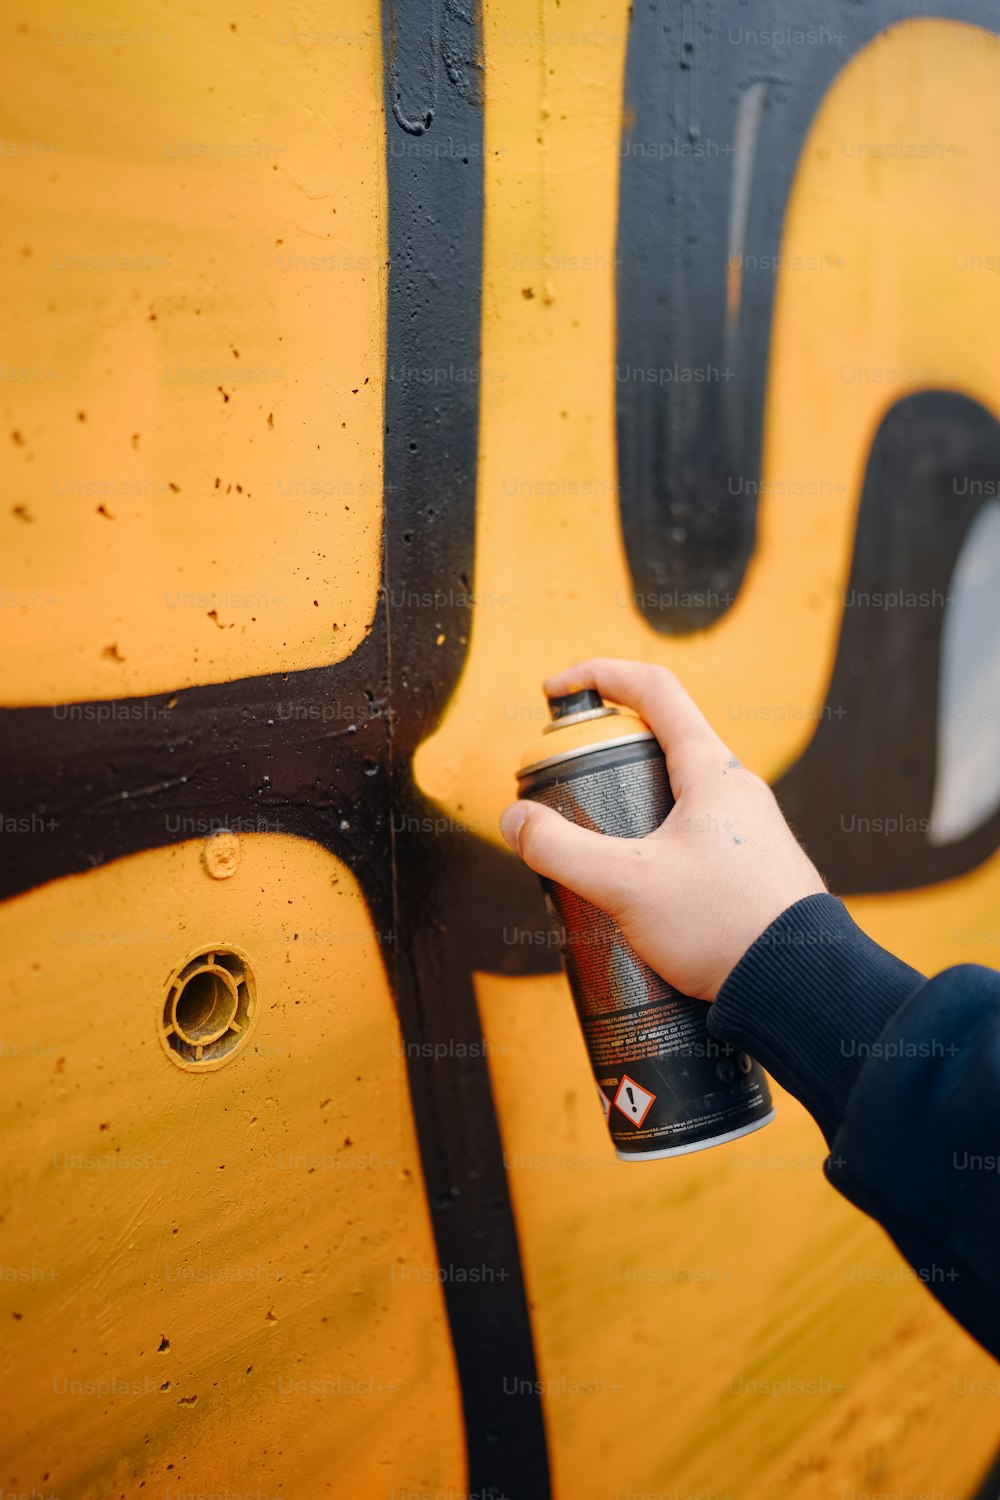 a person spray painting a wall with yellow and black paint